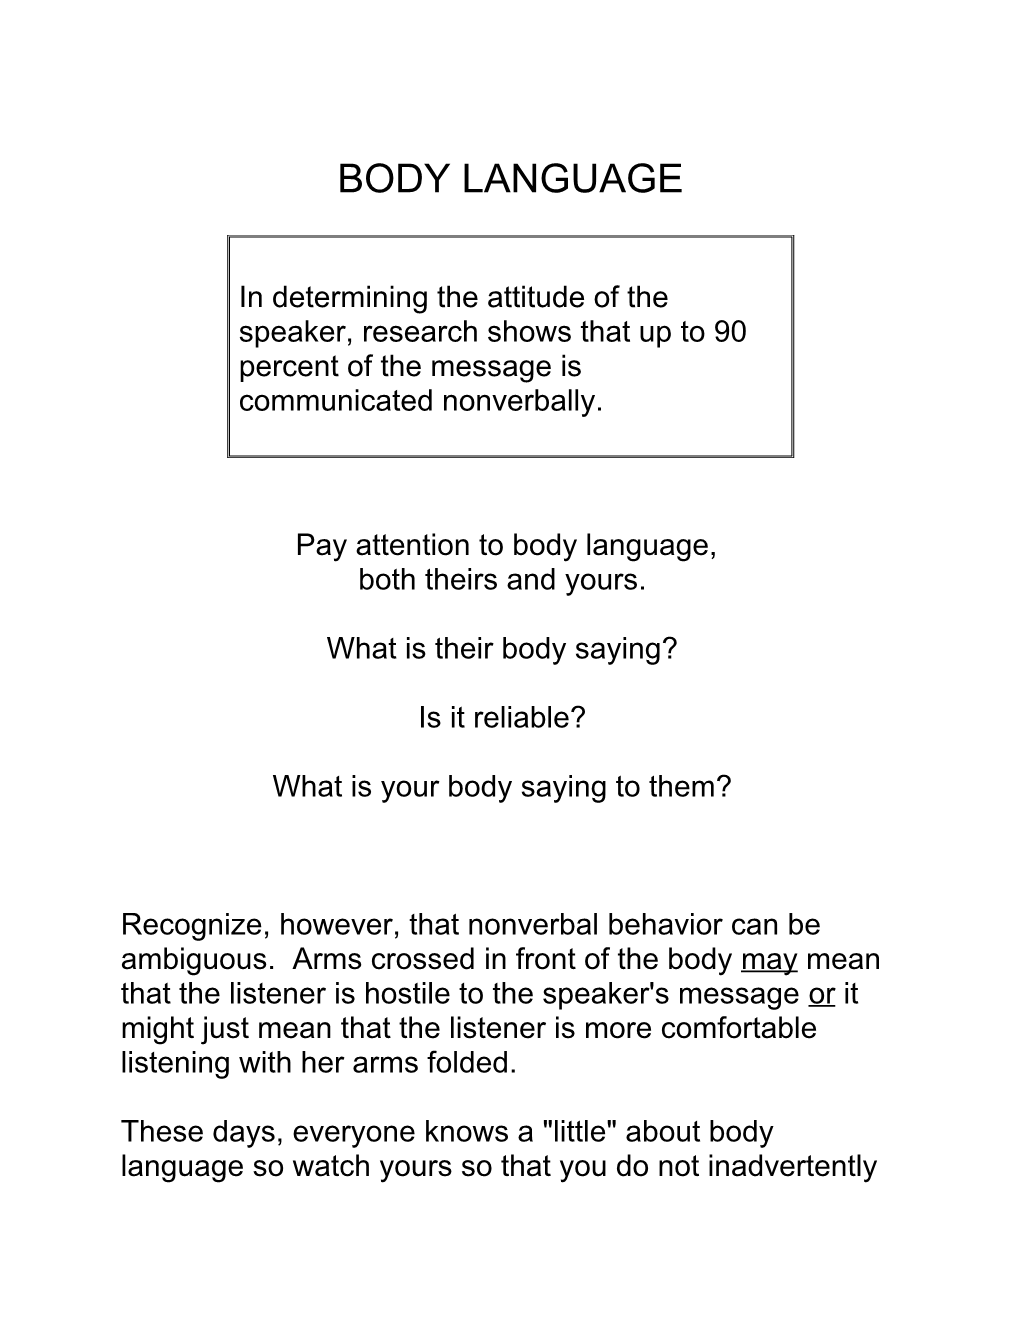 Pay Attention to Body Language